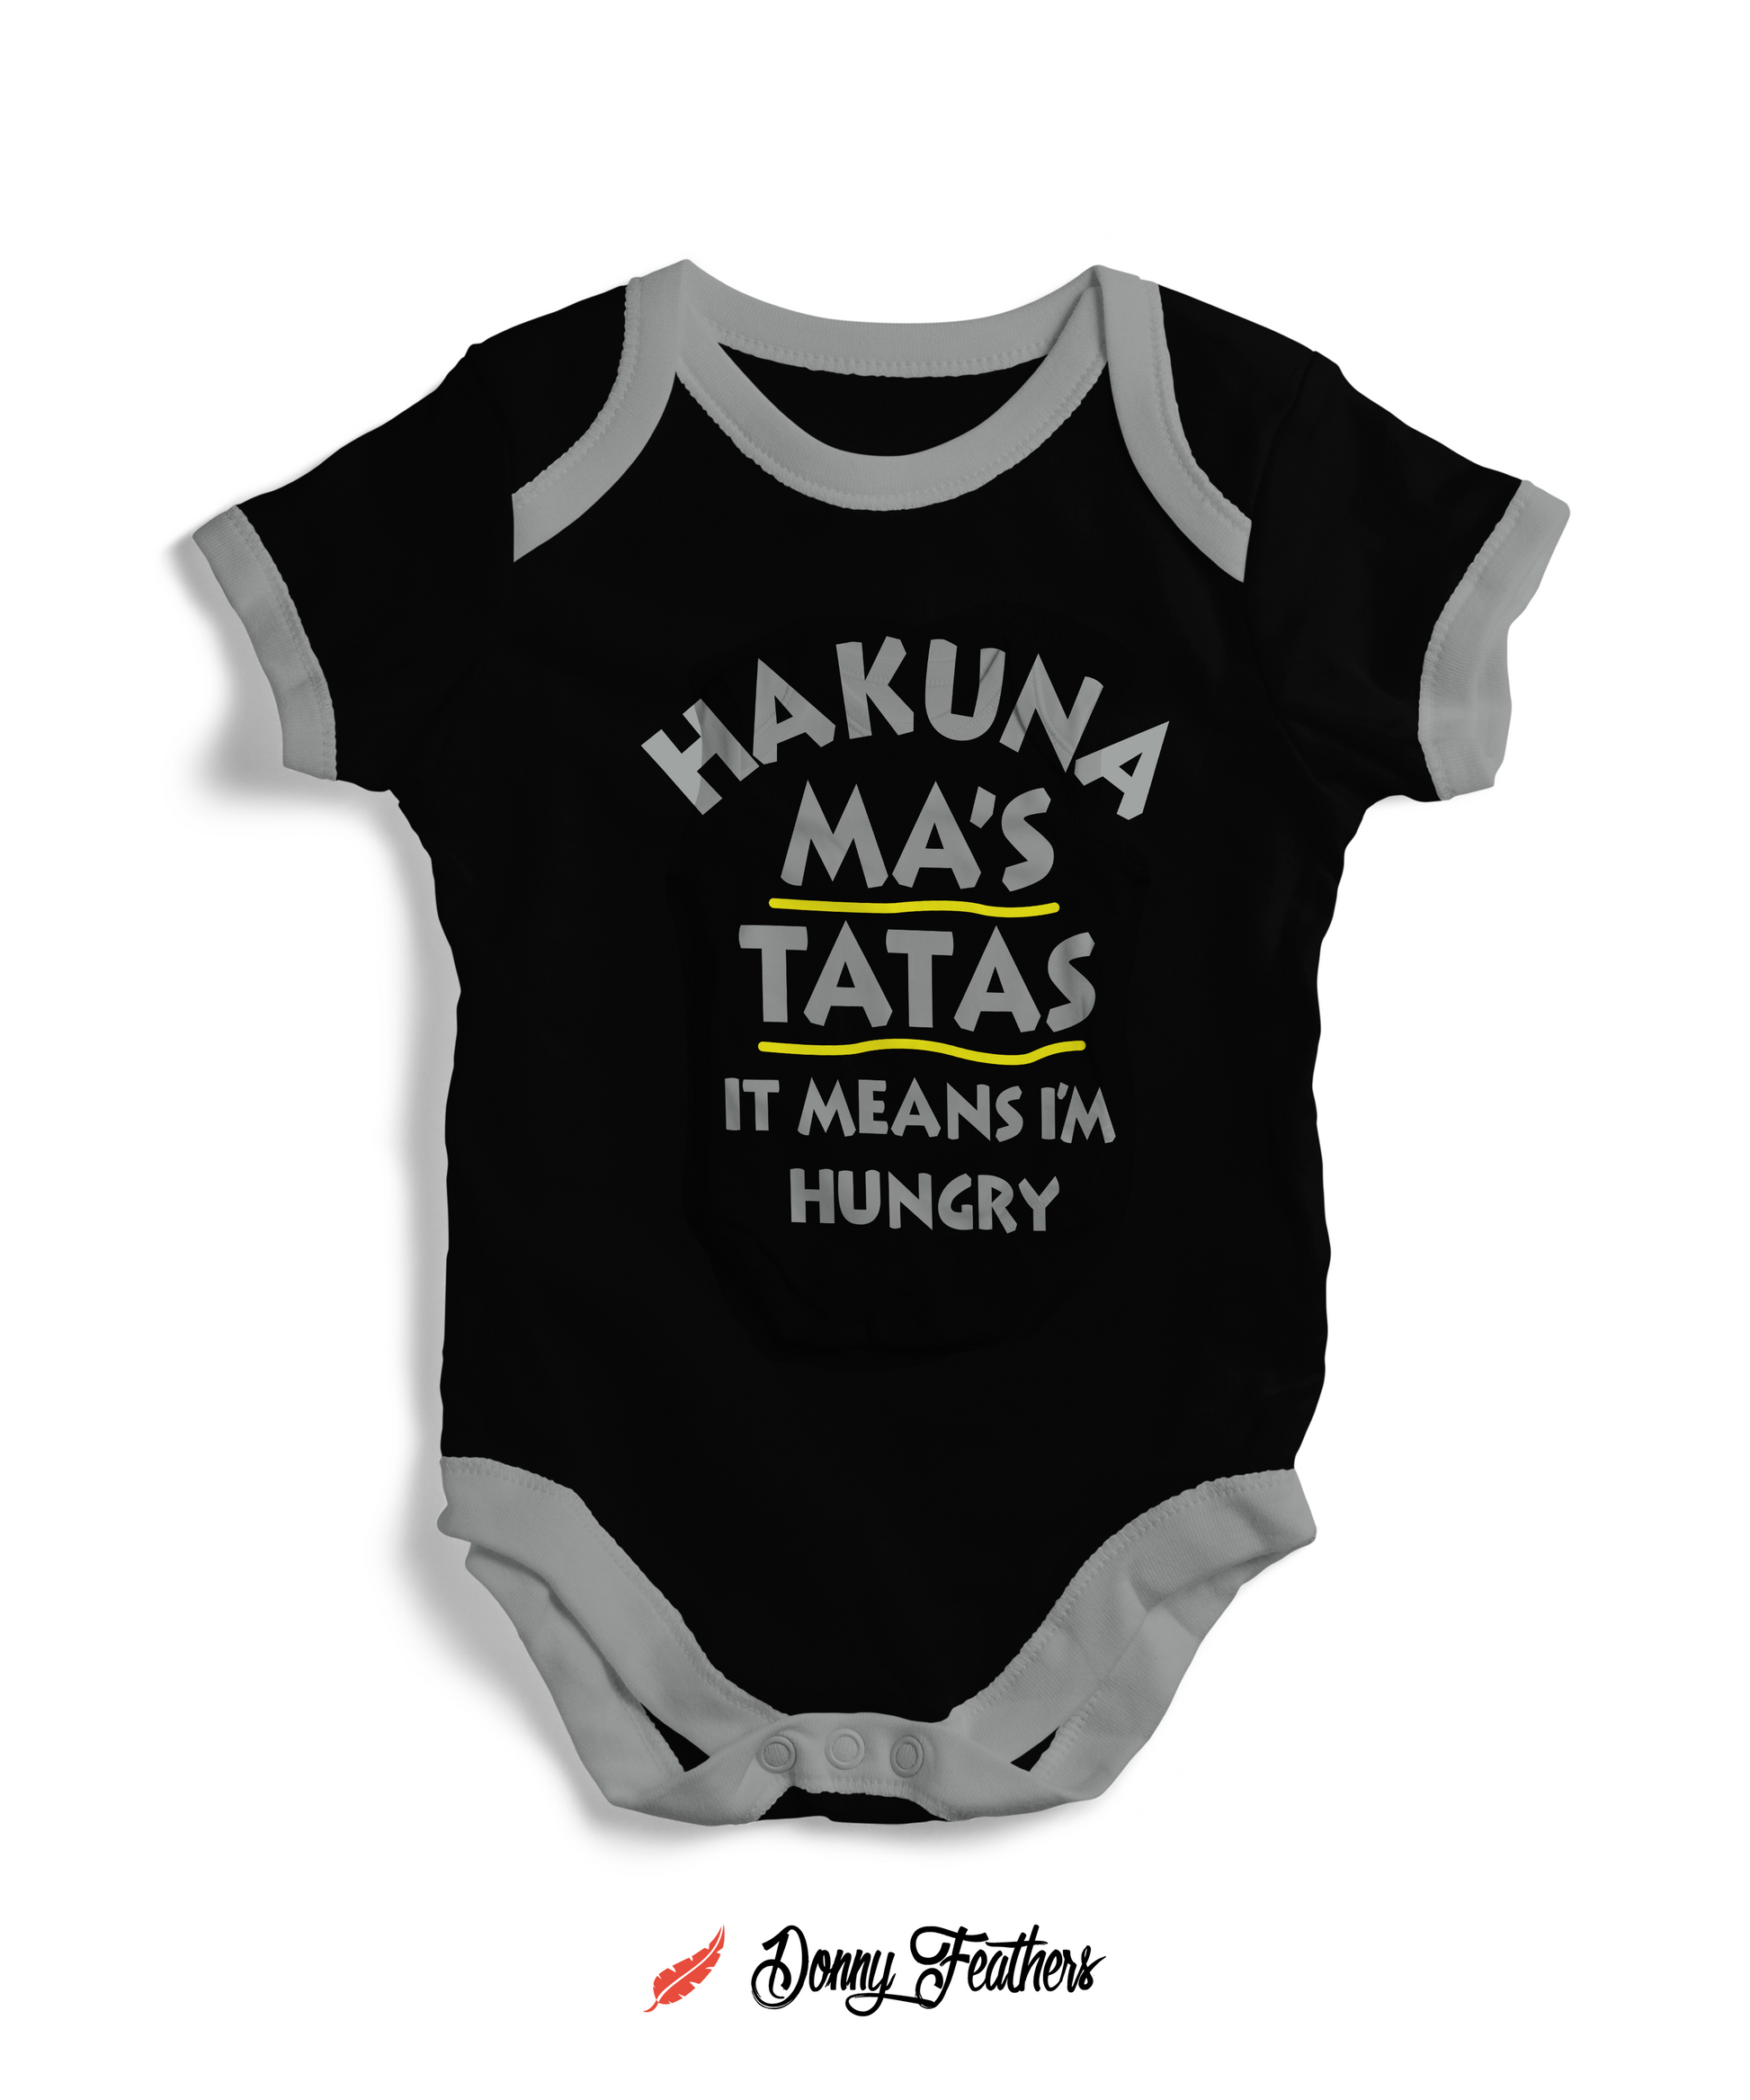 Baby Rompers | Hakuna Matata The Lion King Romper (Black) By: Donny Feathers